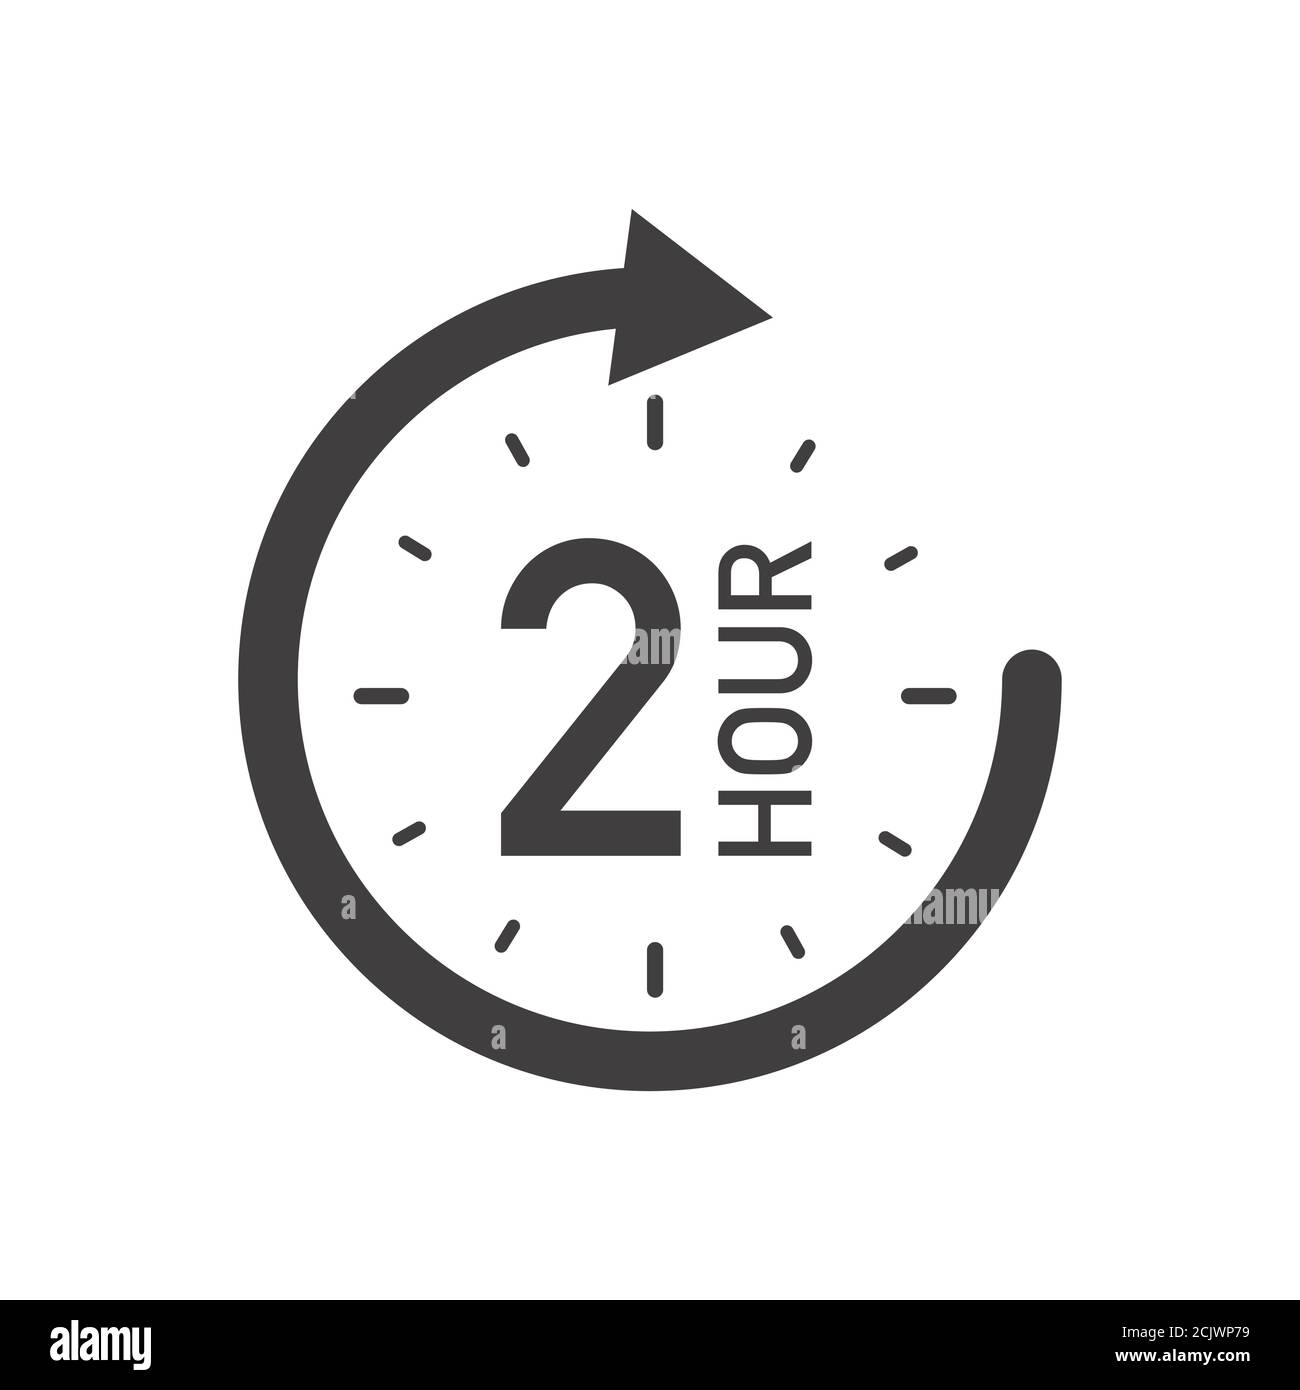 Two hour round icon with arrow. Black and white vector symbol. Stock Vector